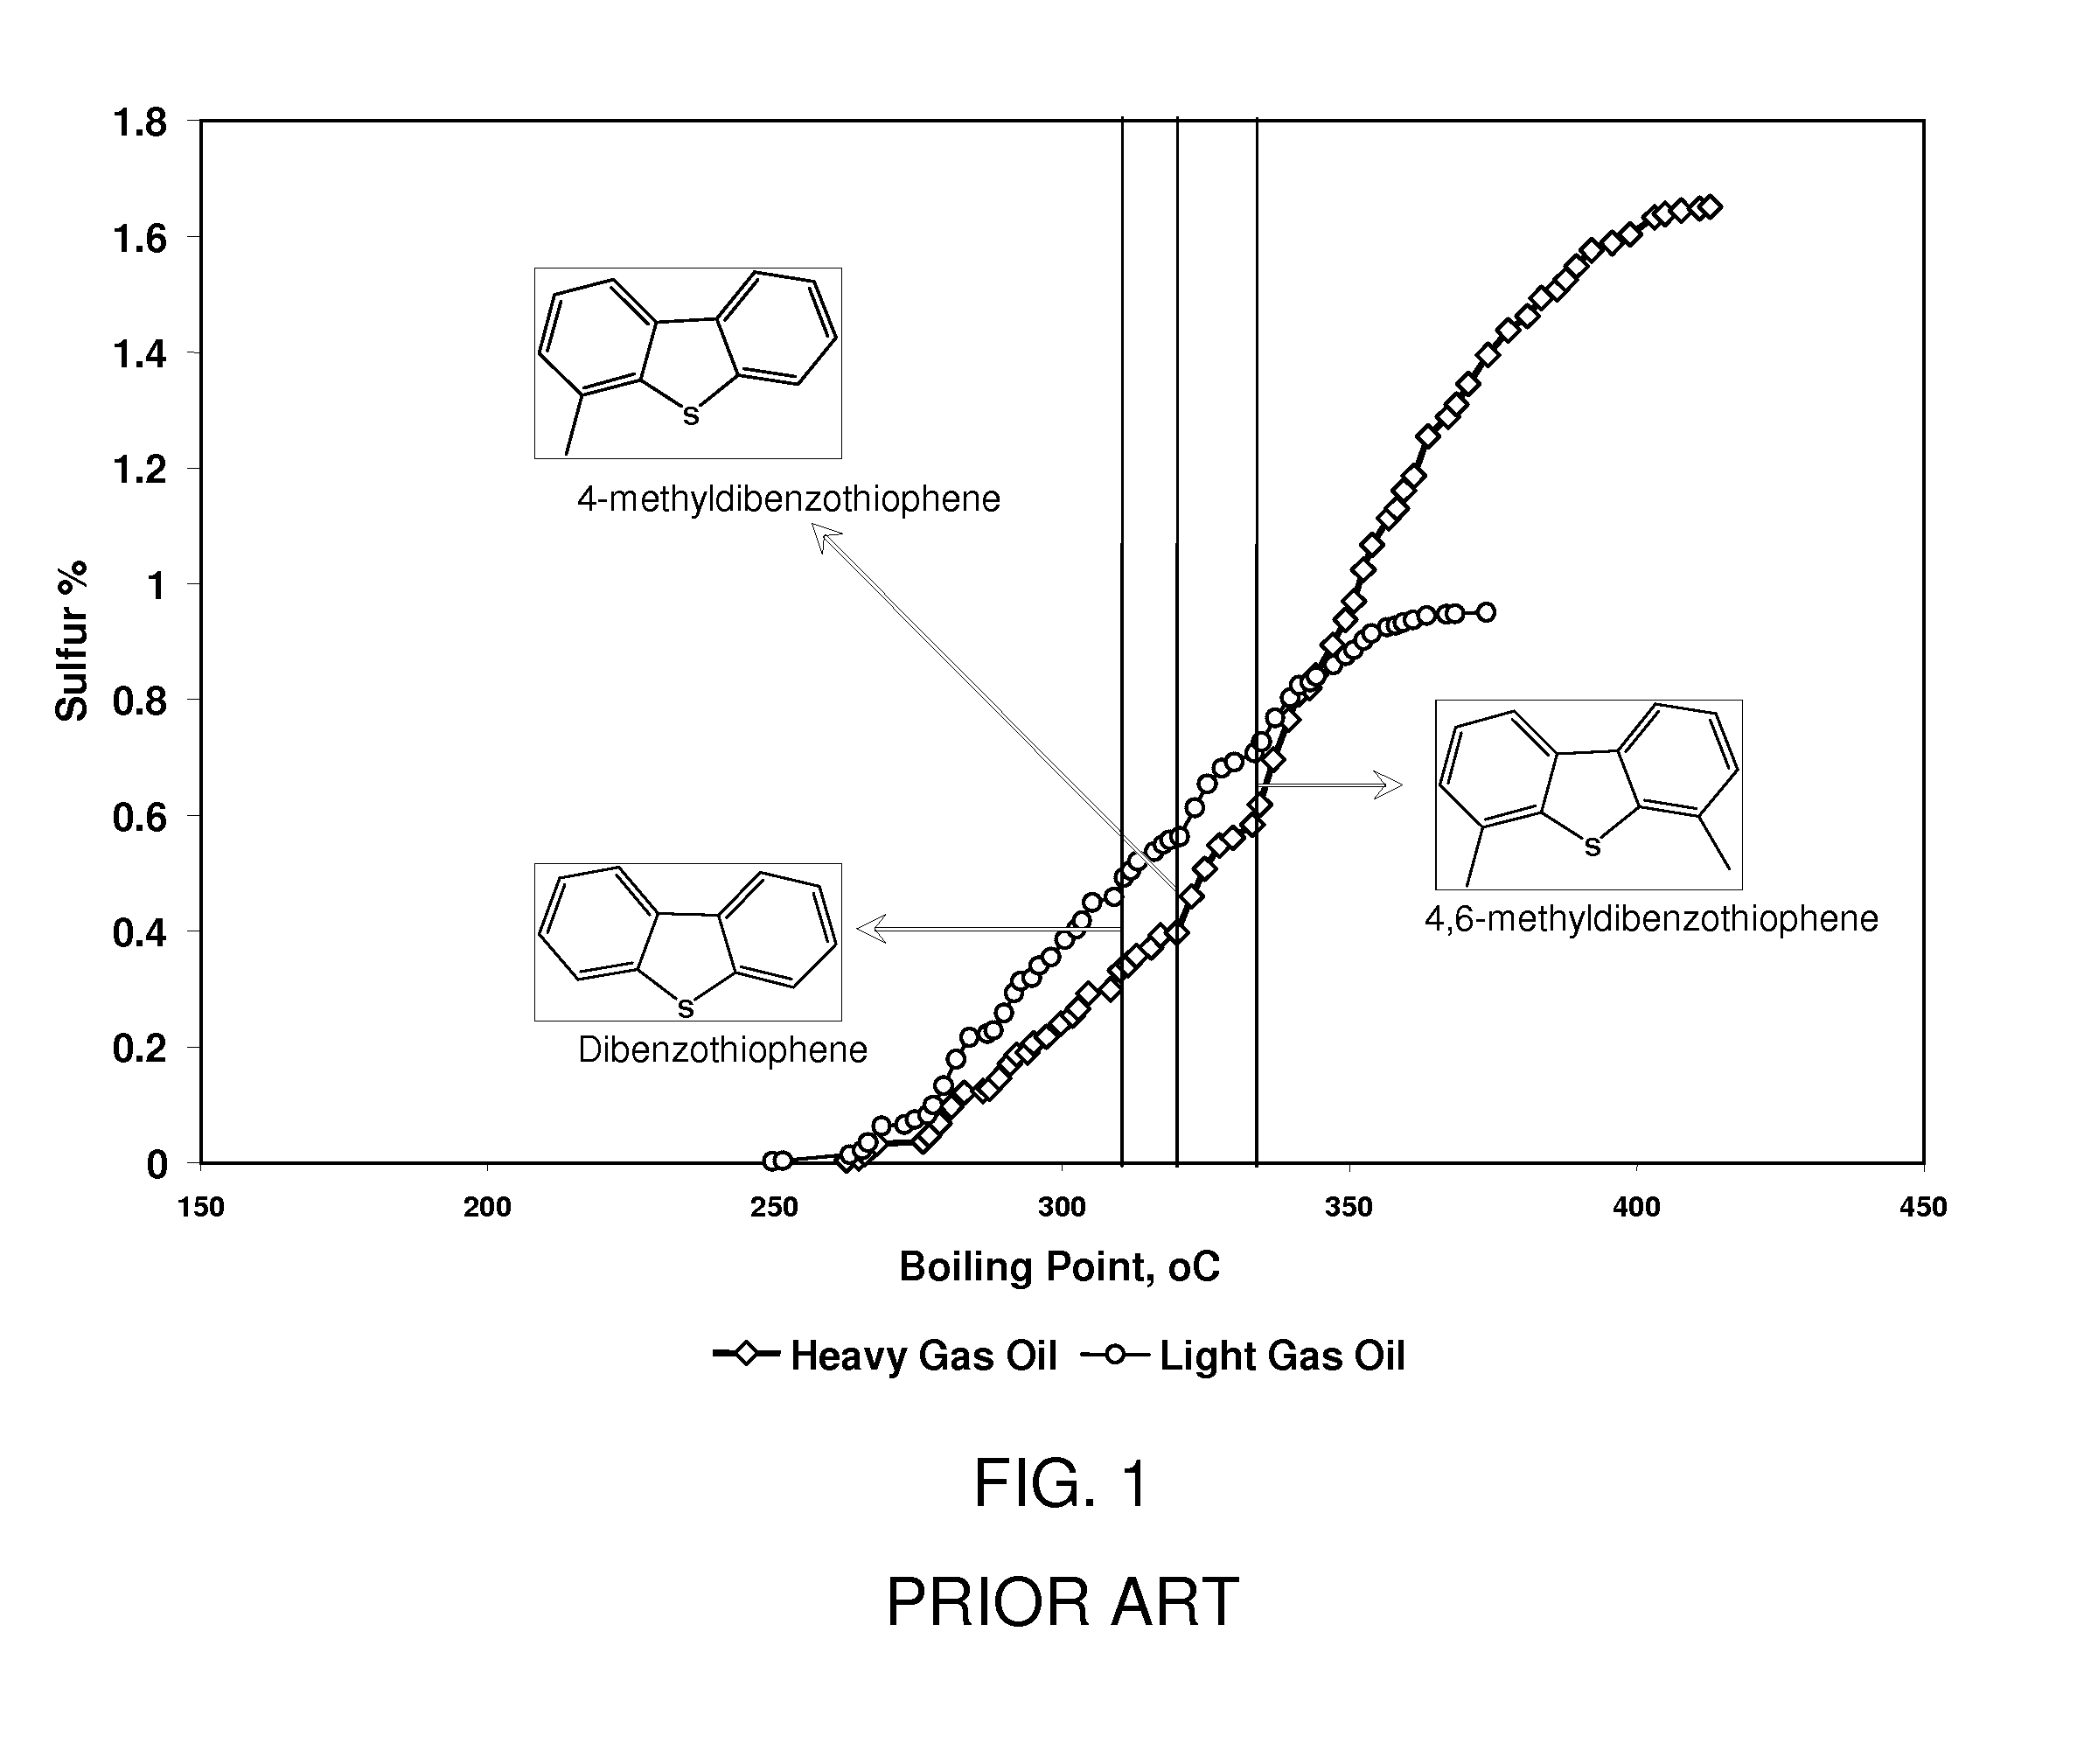 Targeted desulfurization process and apparatus integrating oxidative desulfurization and hydrodesulfurization to produce diesel fuel having an ultra-low level of organosulfur compounds